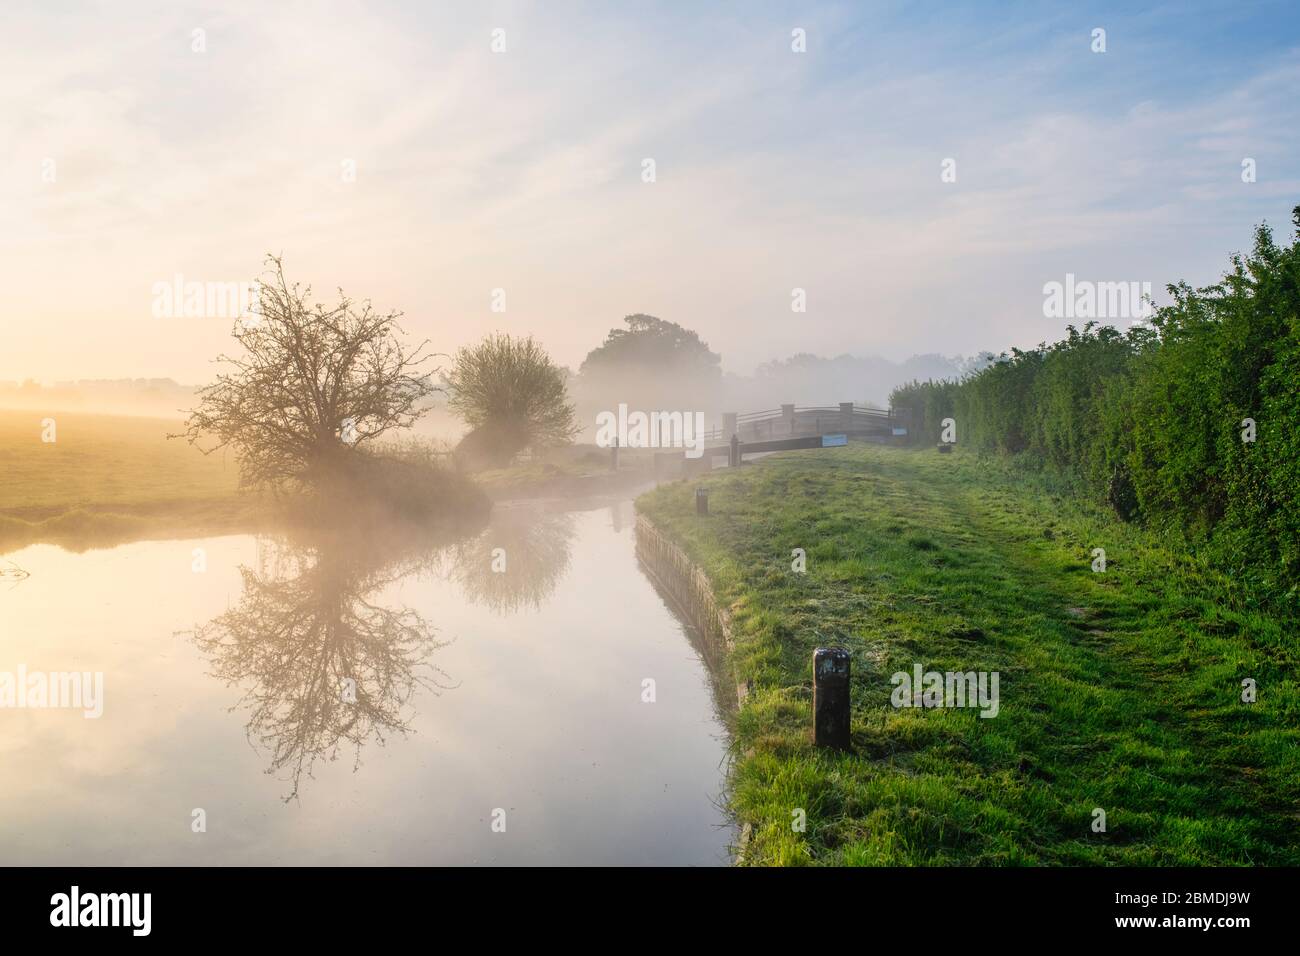 Lock and bridge in the mist on the Oxford canal on a spring morning just after sunrise. Upper Heyford, Oxfordshire, England Stock Photo